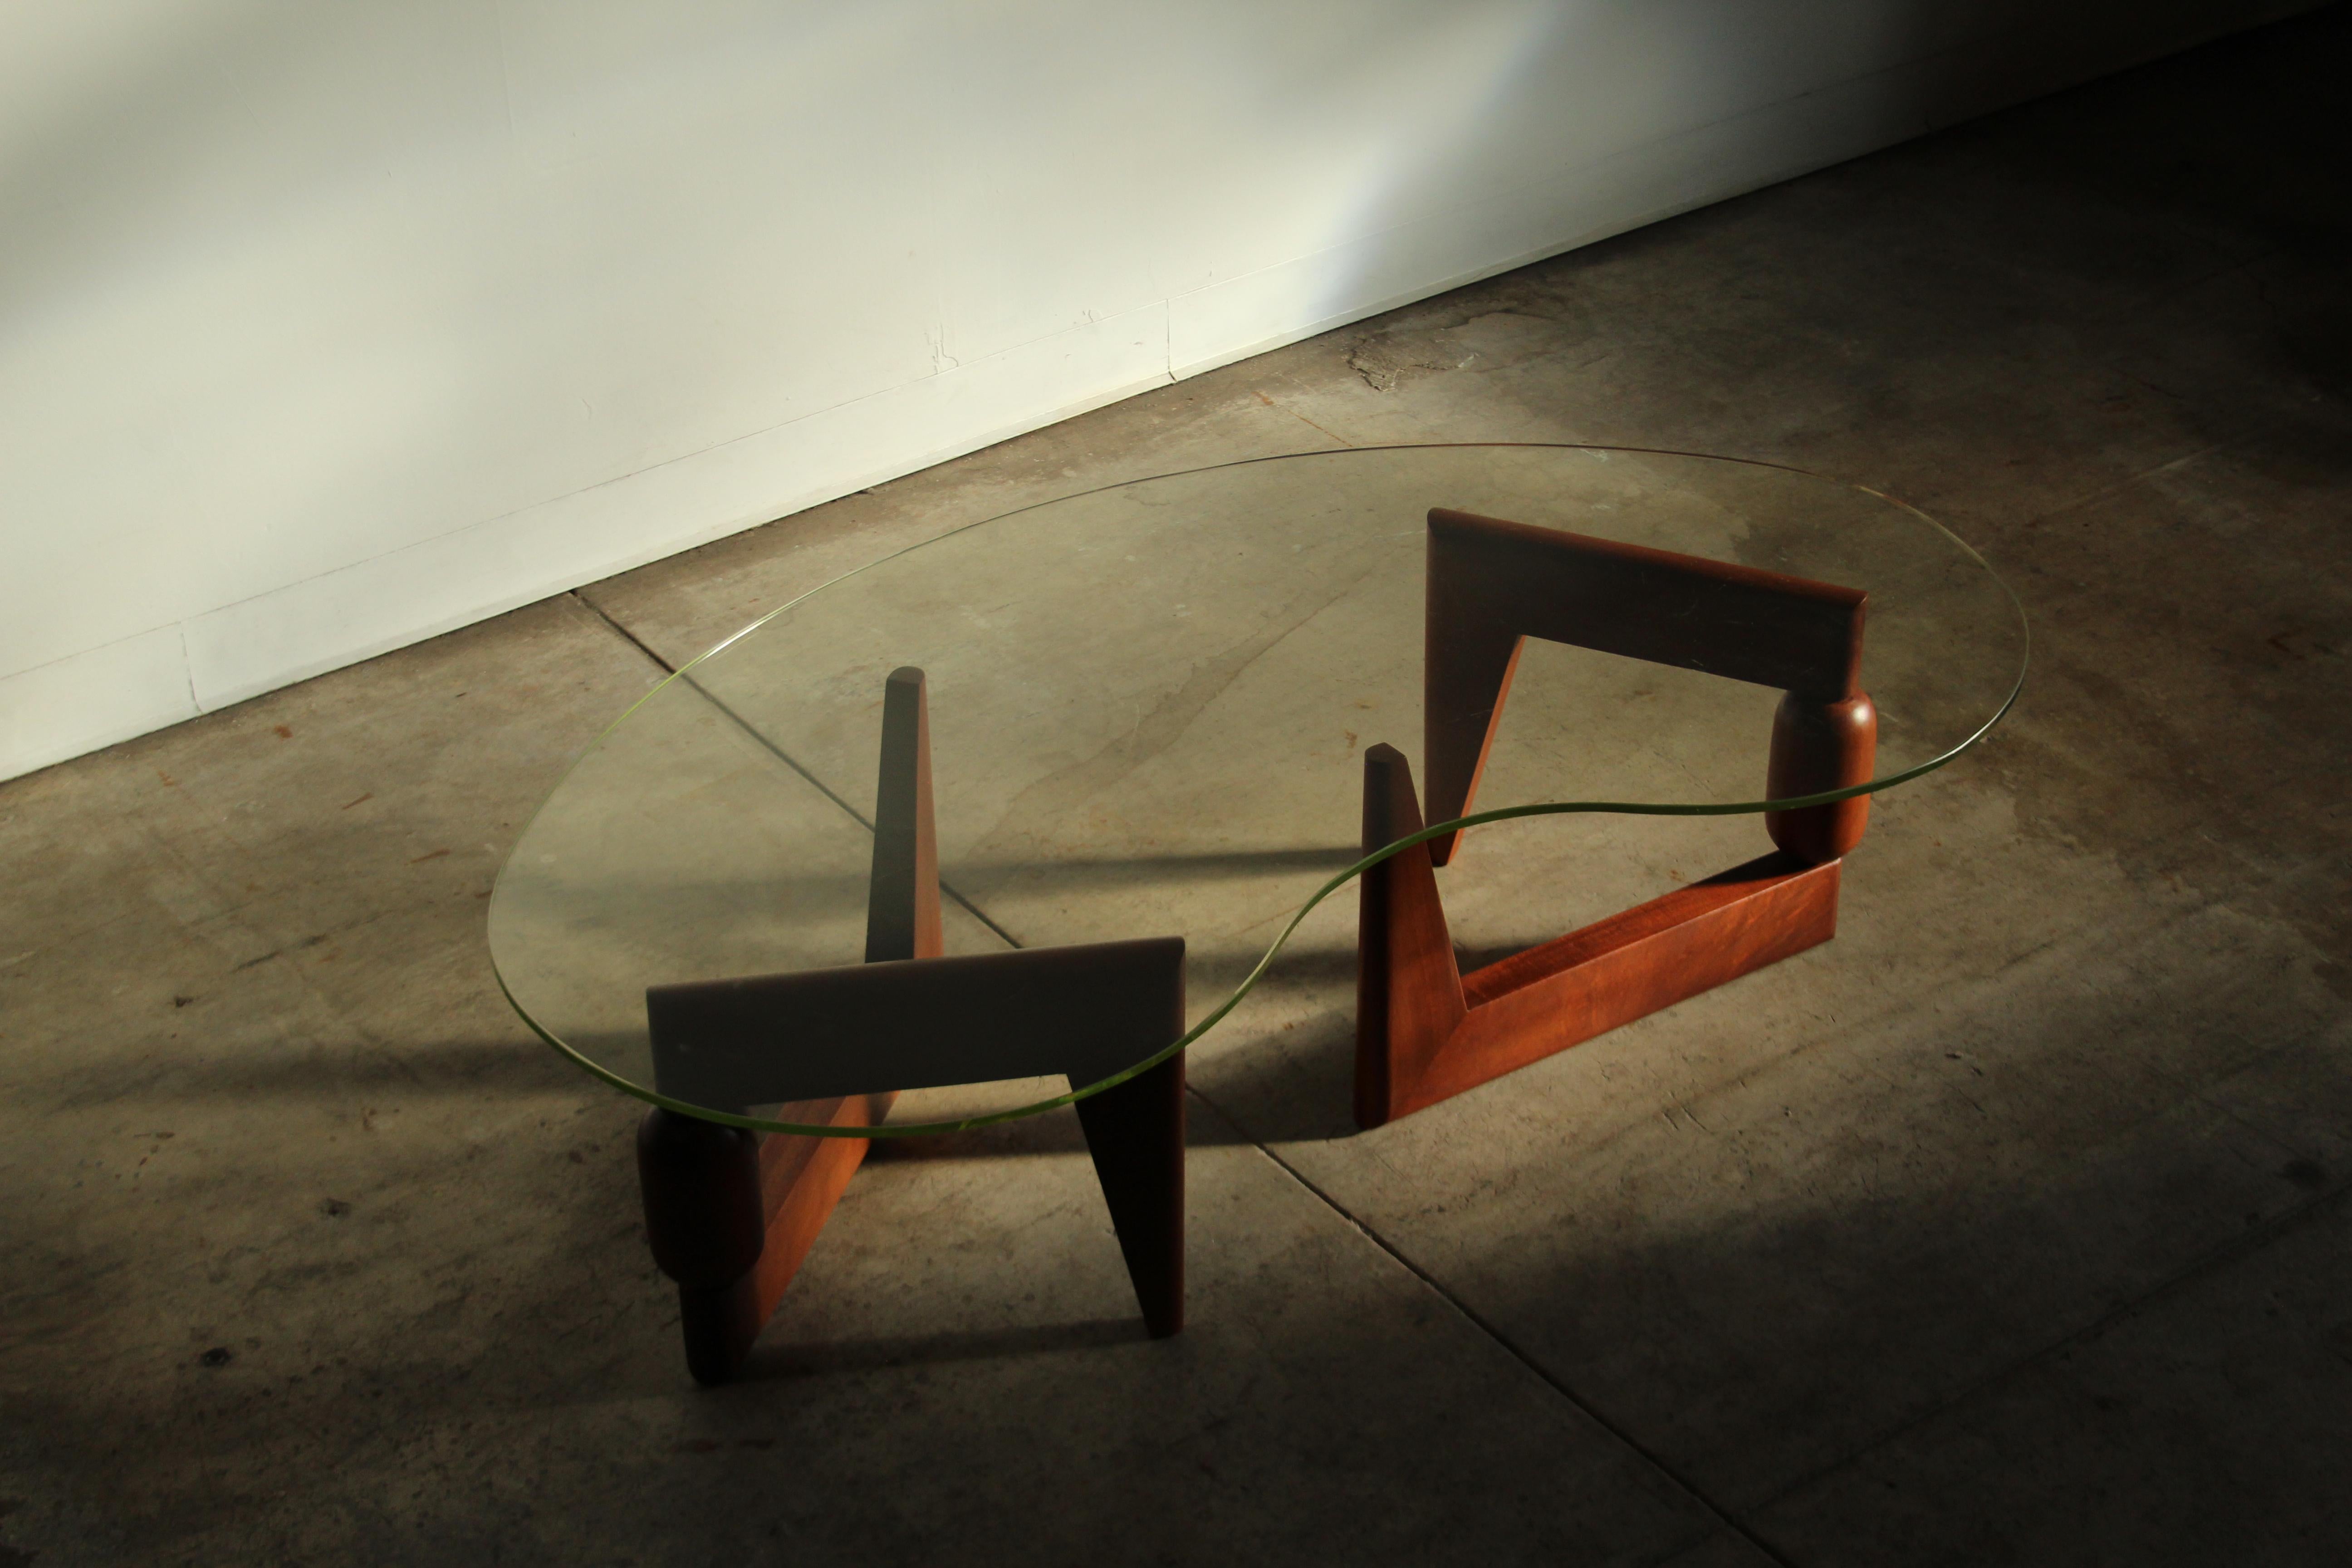 Sculptural Freeform Coffee Table in the Manner of Isamu Noguchi, 1970s For Sale 3